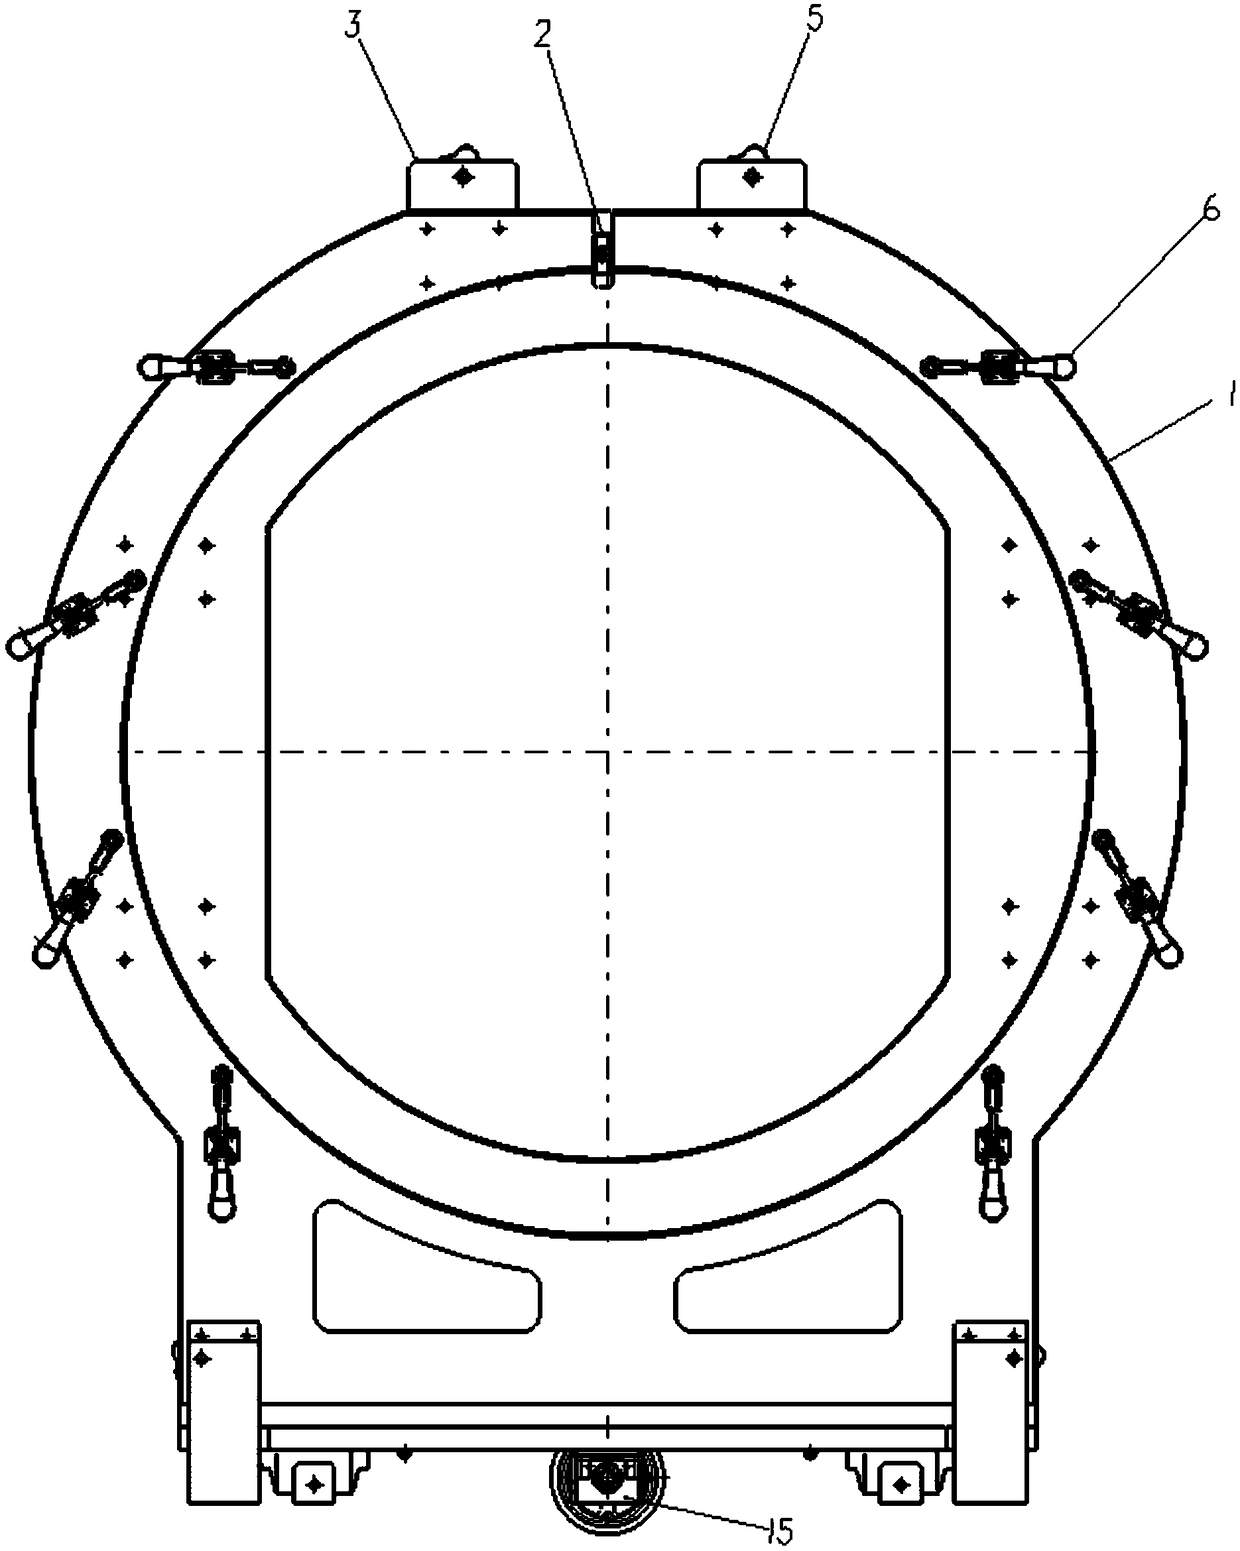 Device for installing cylindrical flange